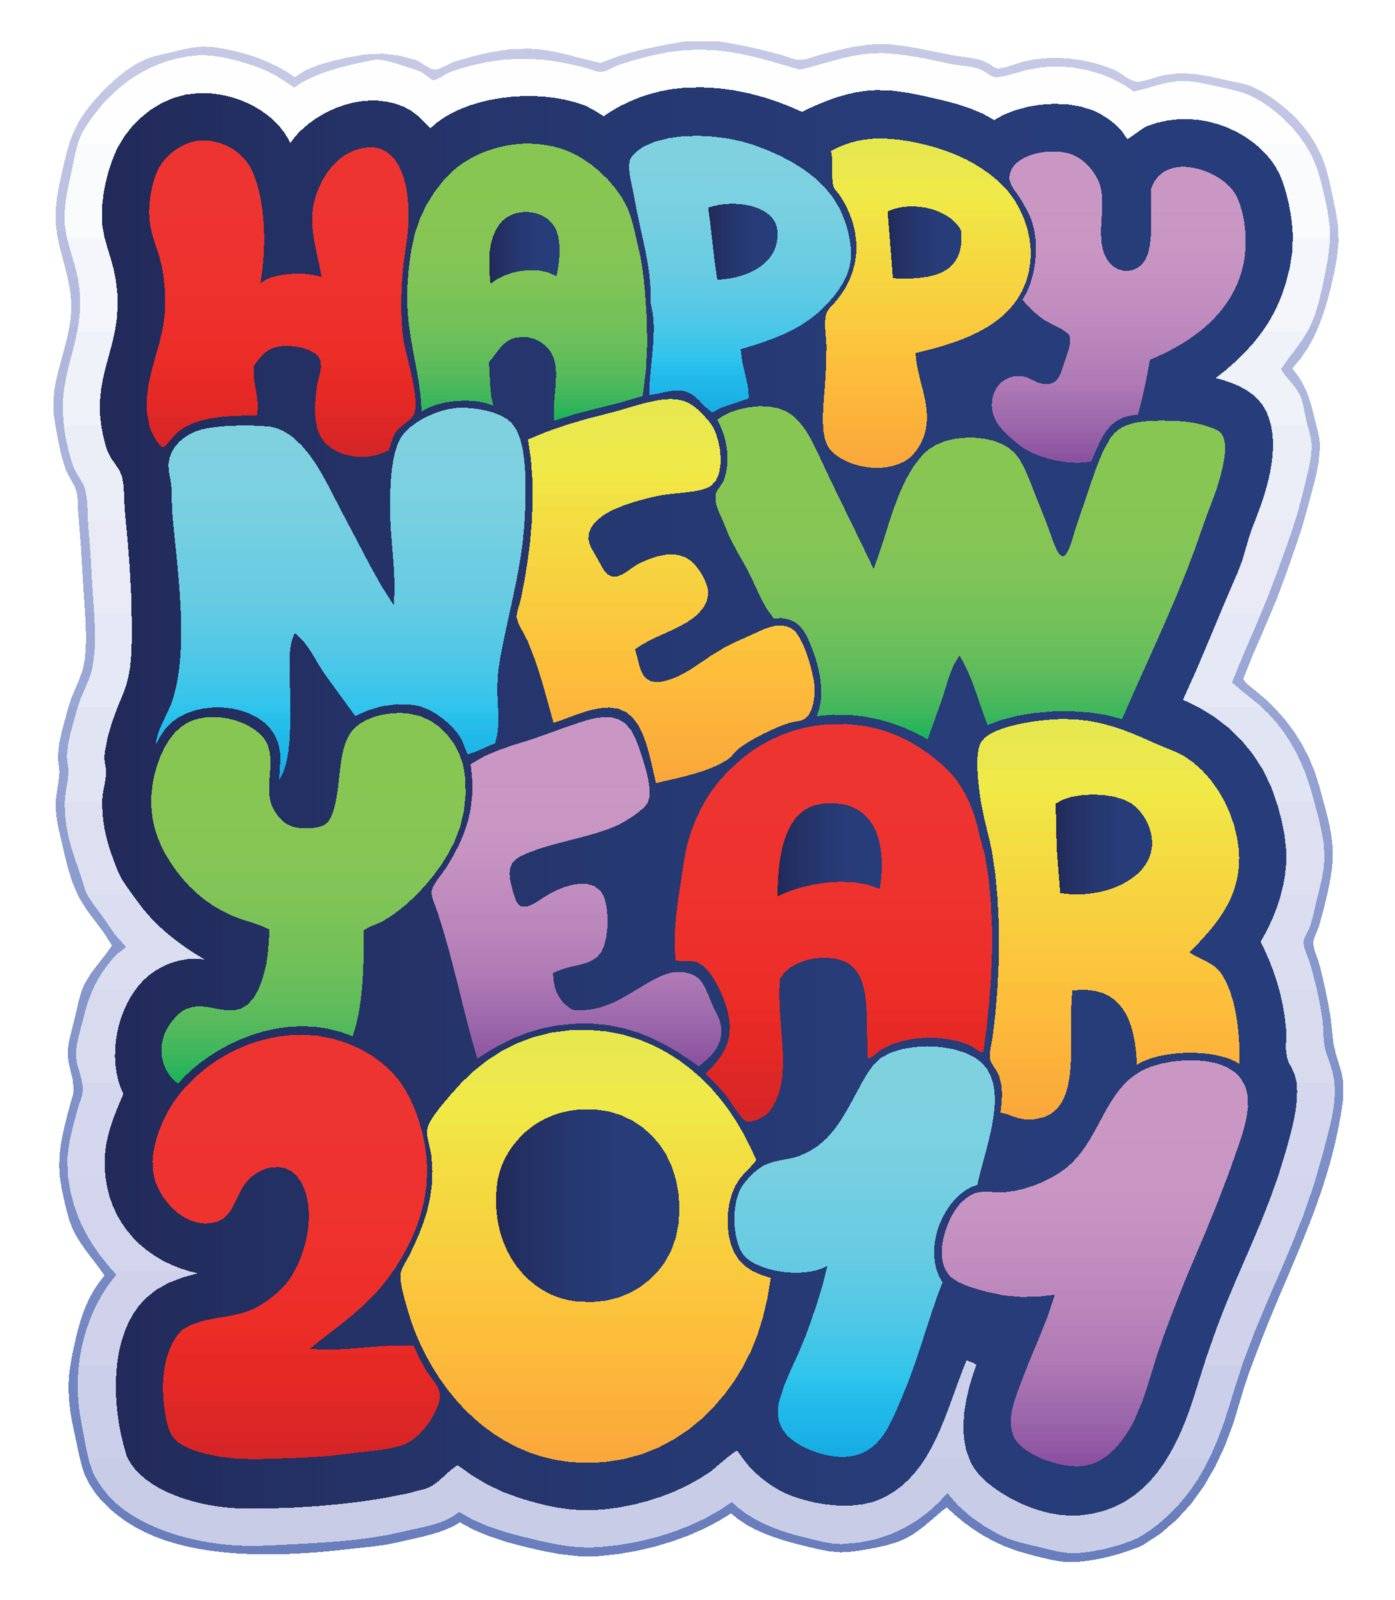 Happy New Year sign 2011 - vector illustration.